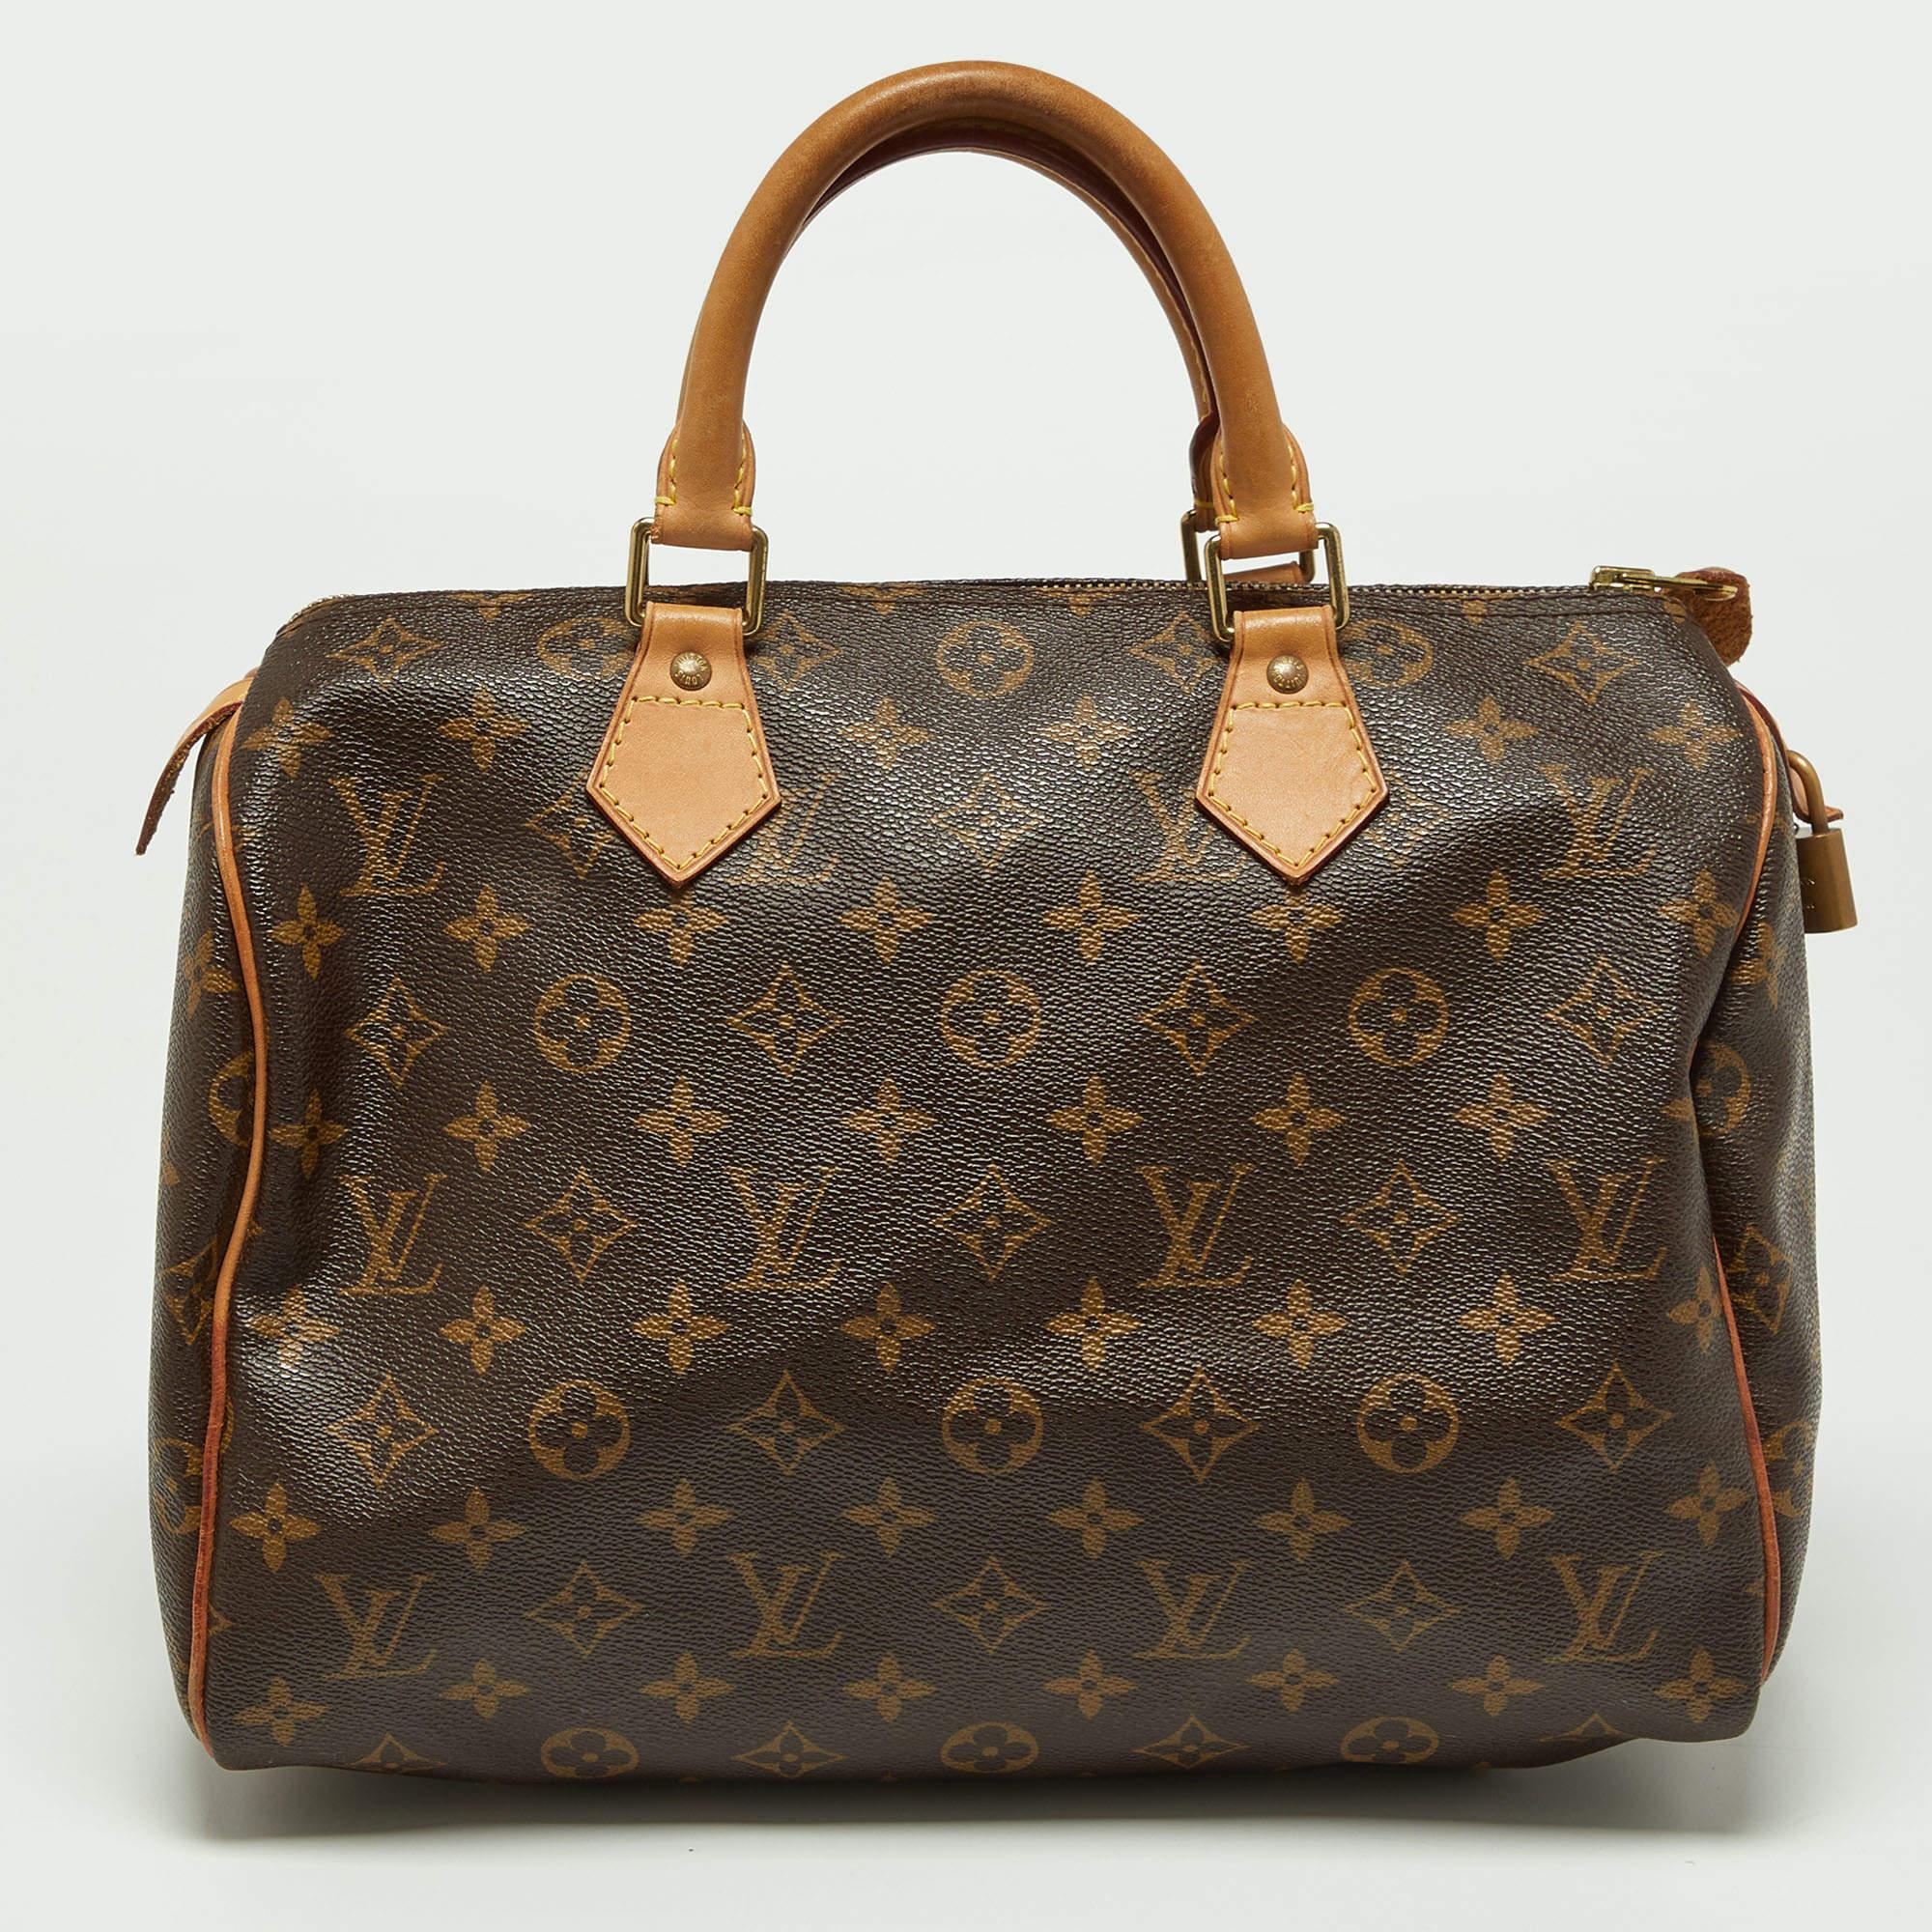 Created to provide you with everyday ease, this Louis Vuitton Speedy 30 bag features dual top handles and a roomy canvas-lined interior. The usage of the signature Monogram canvas in its construction offers instant brand identification. Gold-tone